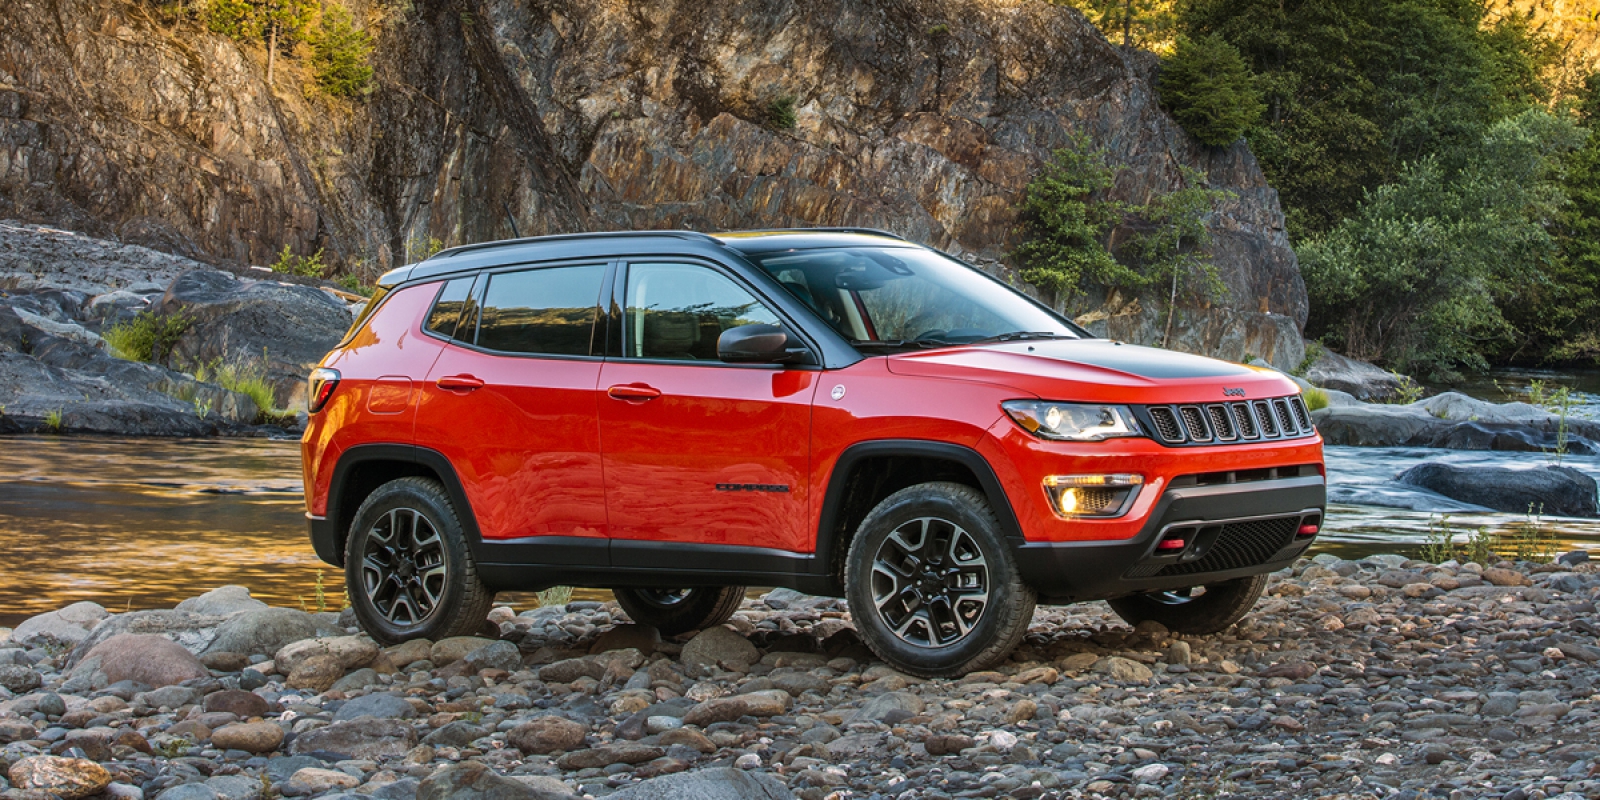 45 Sample 2019 jeep cherokee exterior dimensions Trend in This Years